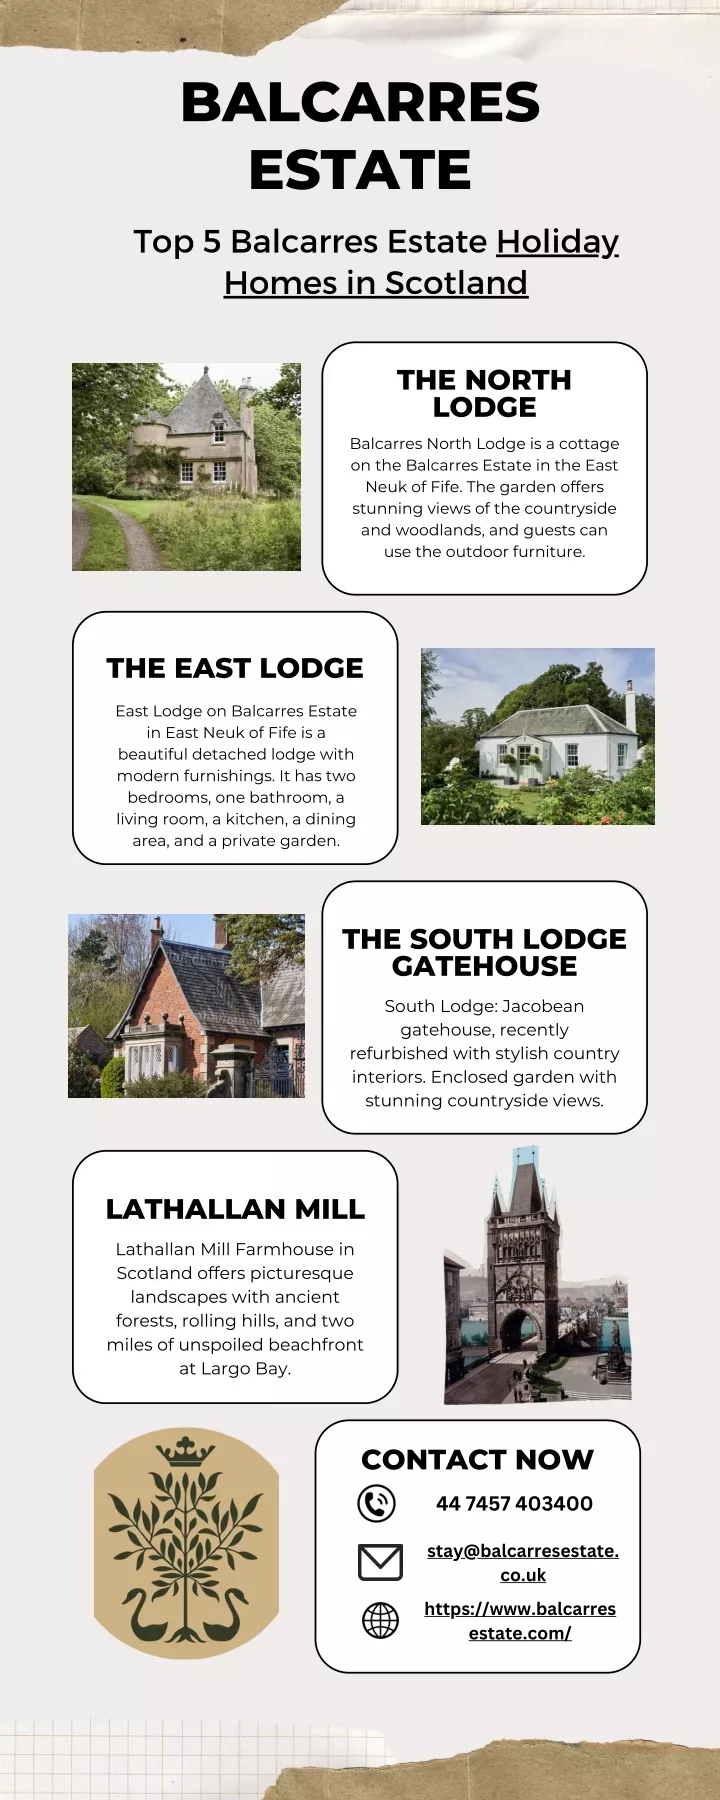 PPT - Top 5 Balcarres Estate Holiday Homes in Scotland (1) PowerPoint Presentation - ID:12995291